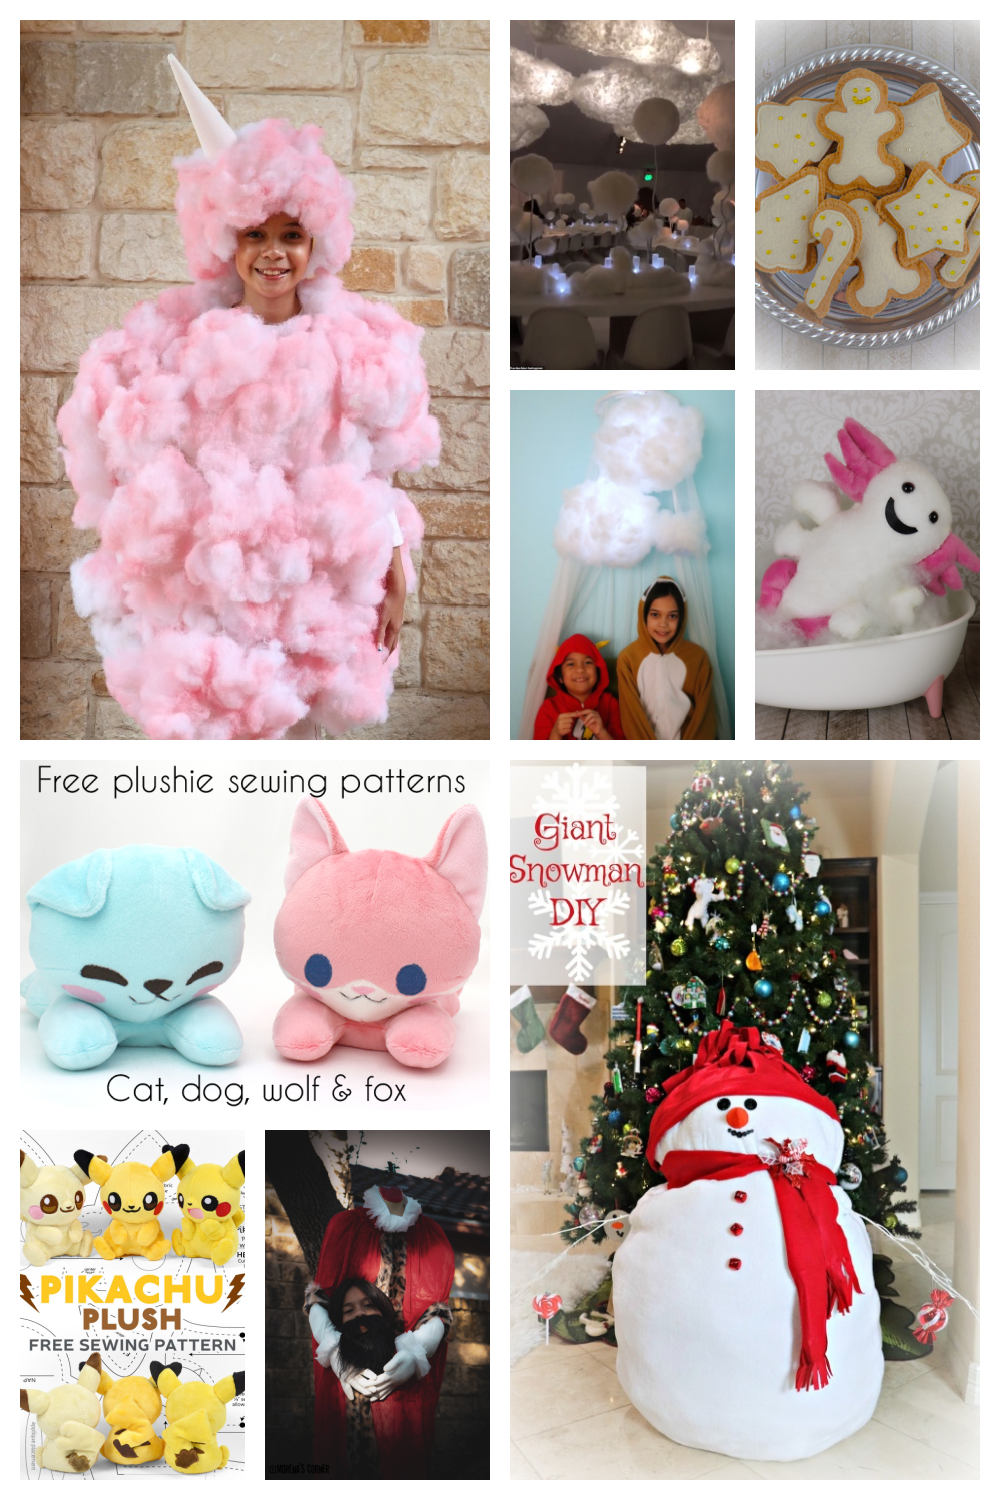 poly-fil fiber fill 10 Days of Giveaways + Project Inspiration